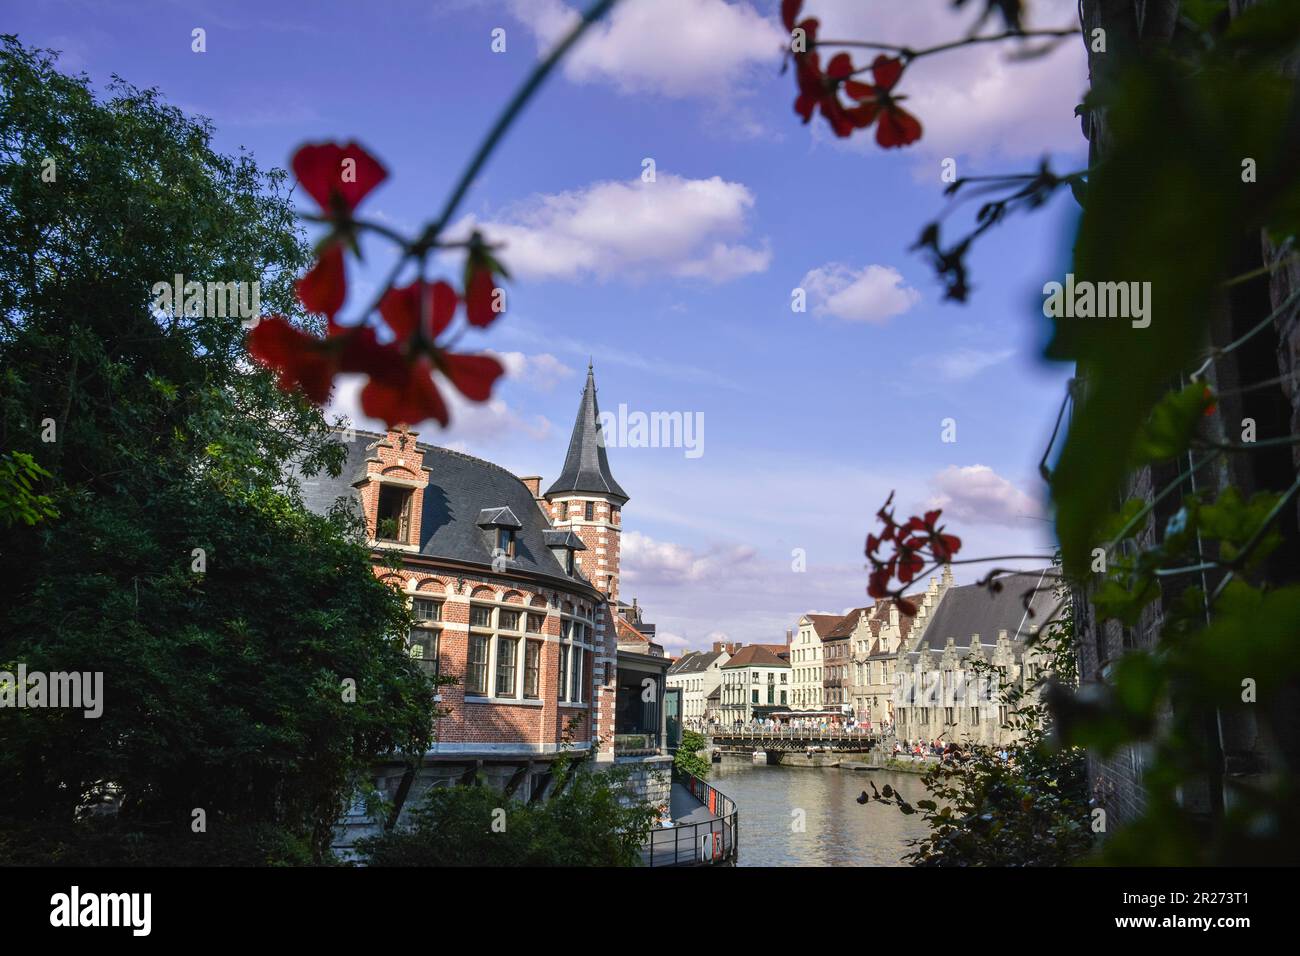 A Fairytale View of Ghent, Belgium Stock Photo